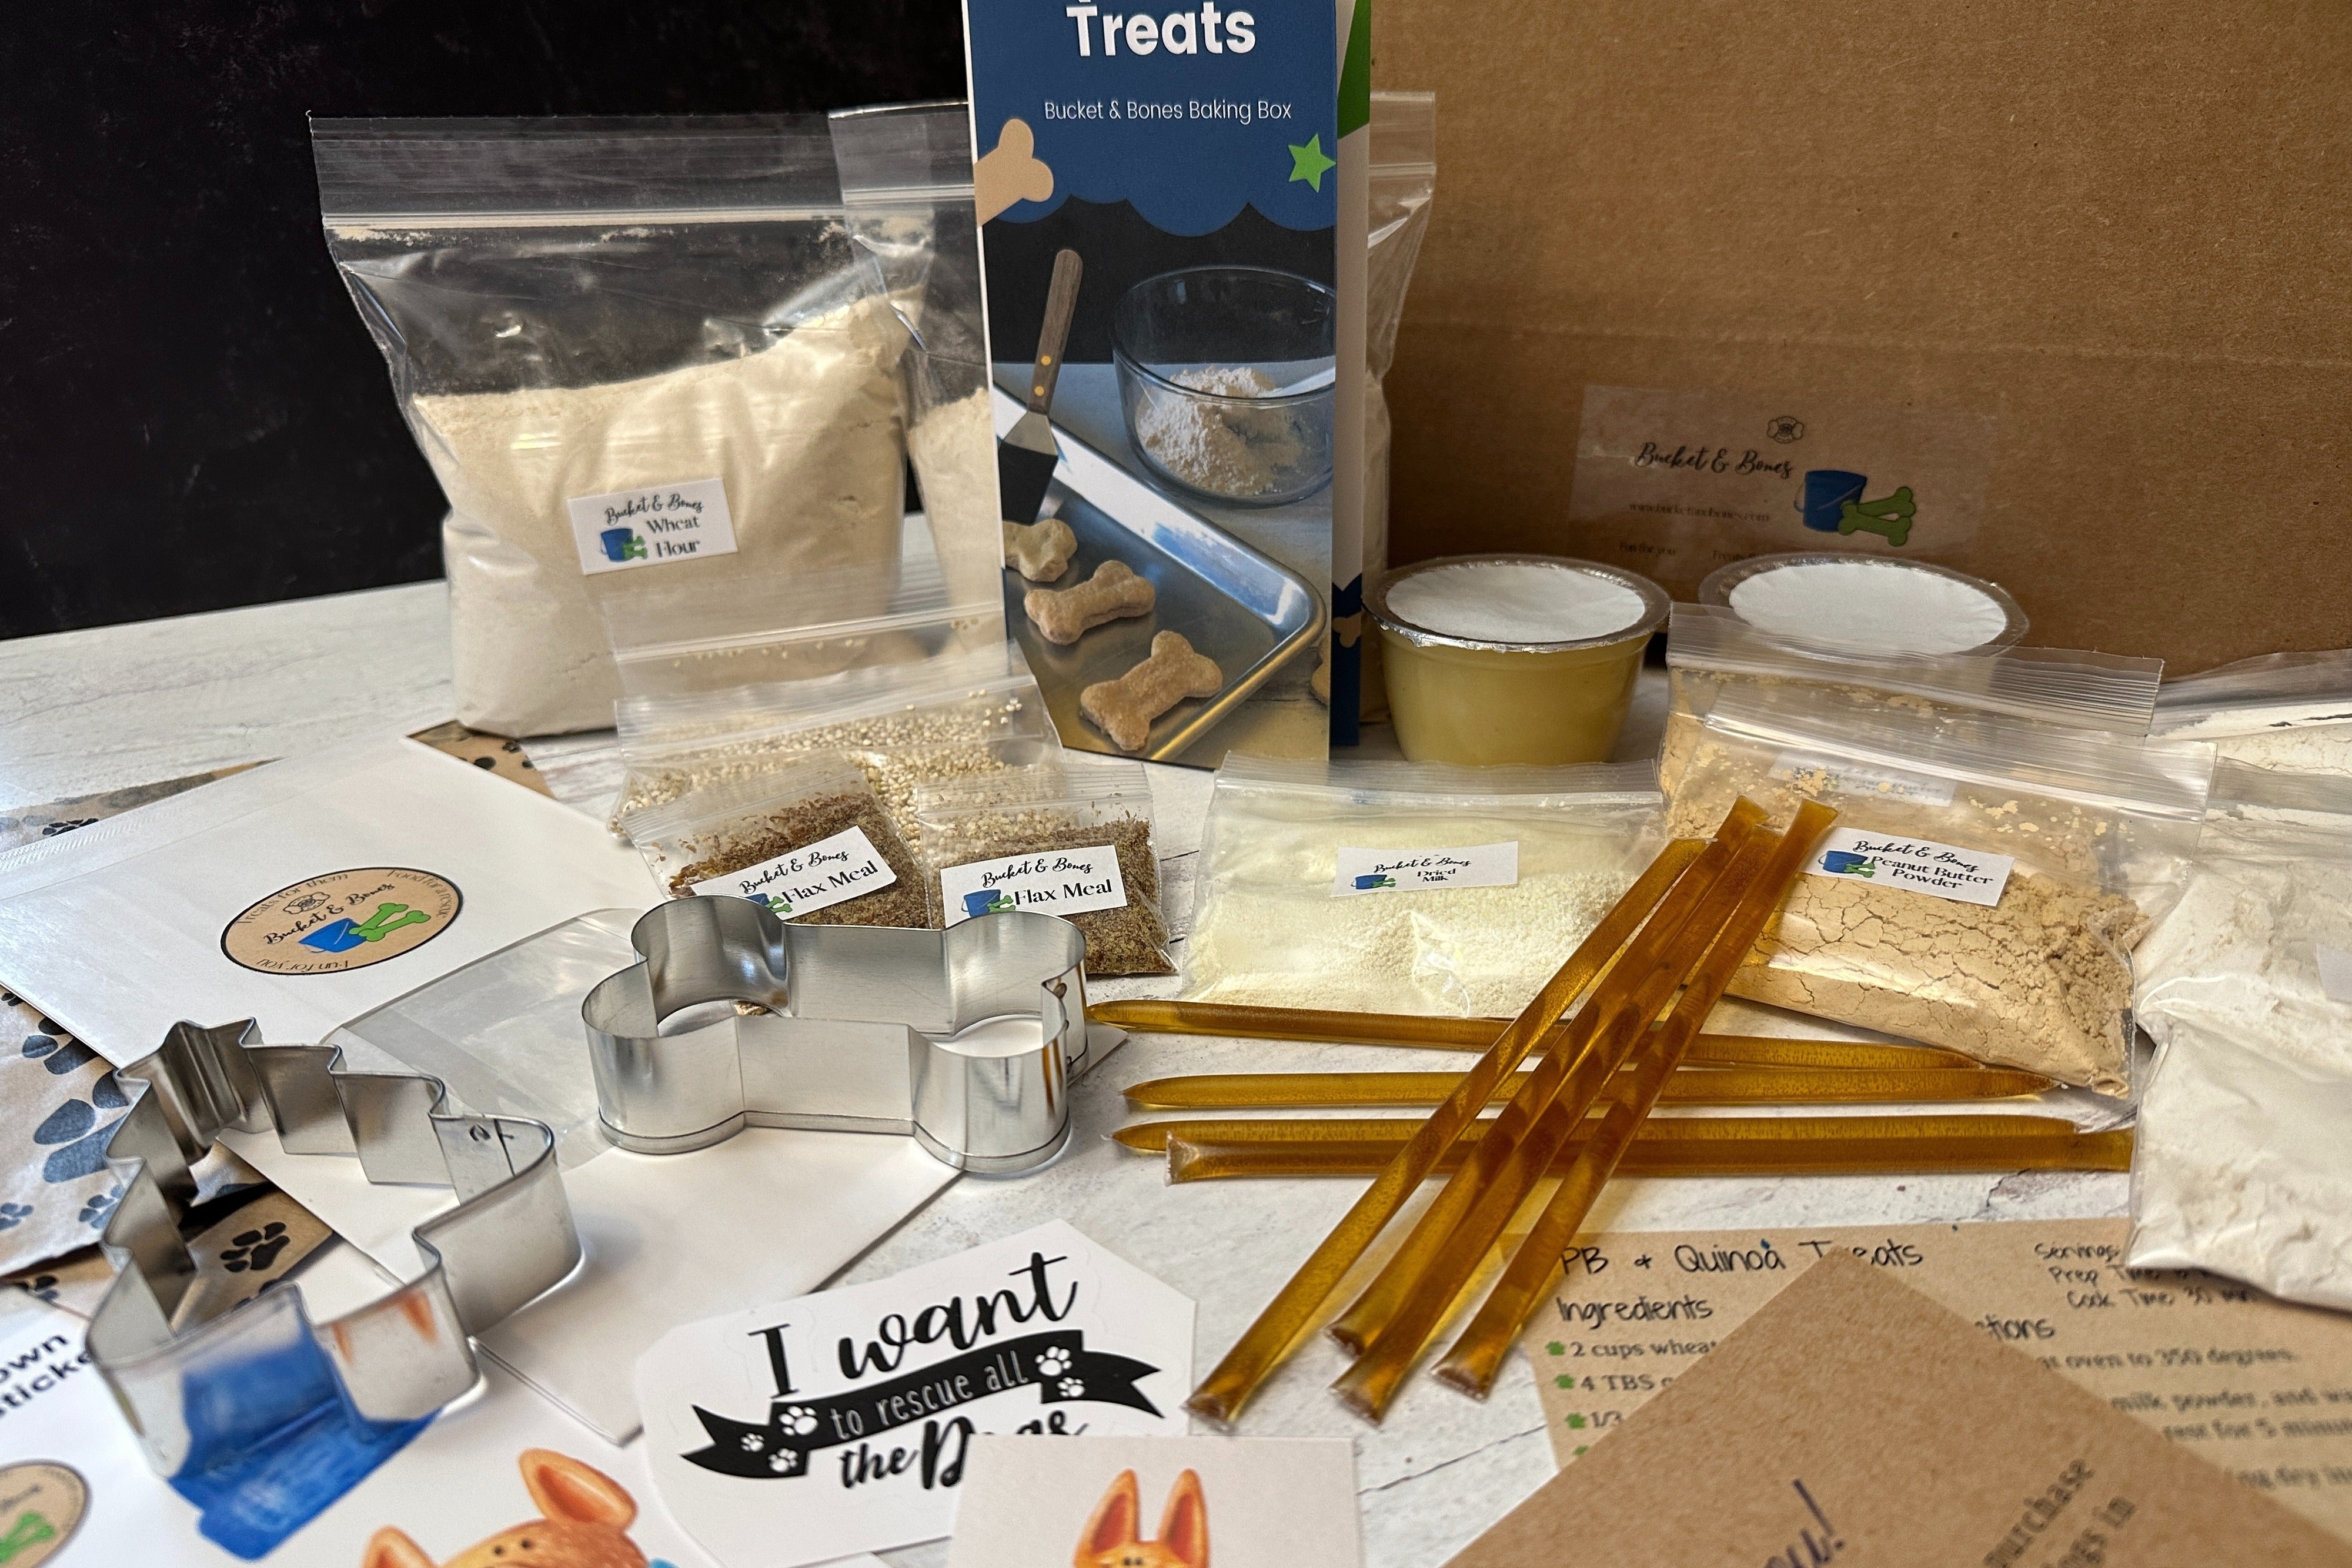 The baking ingredients and tools included in the box